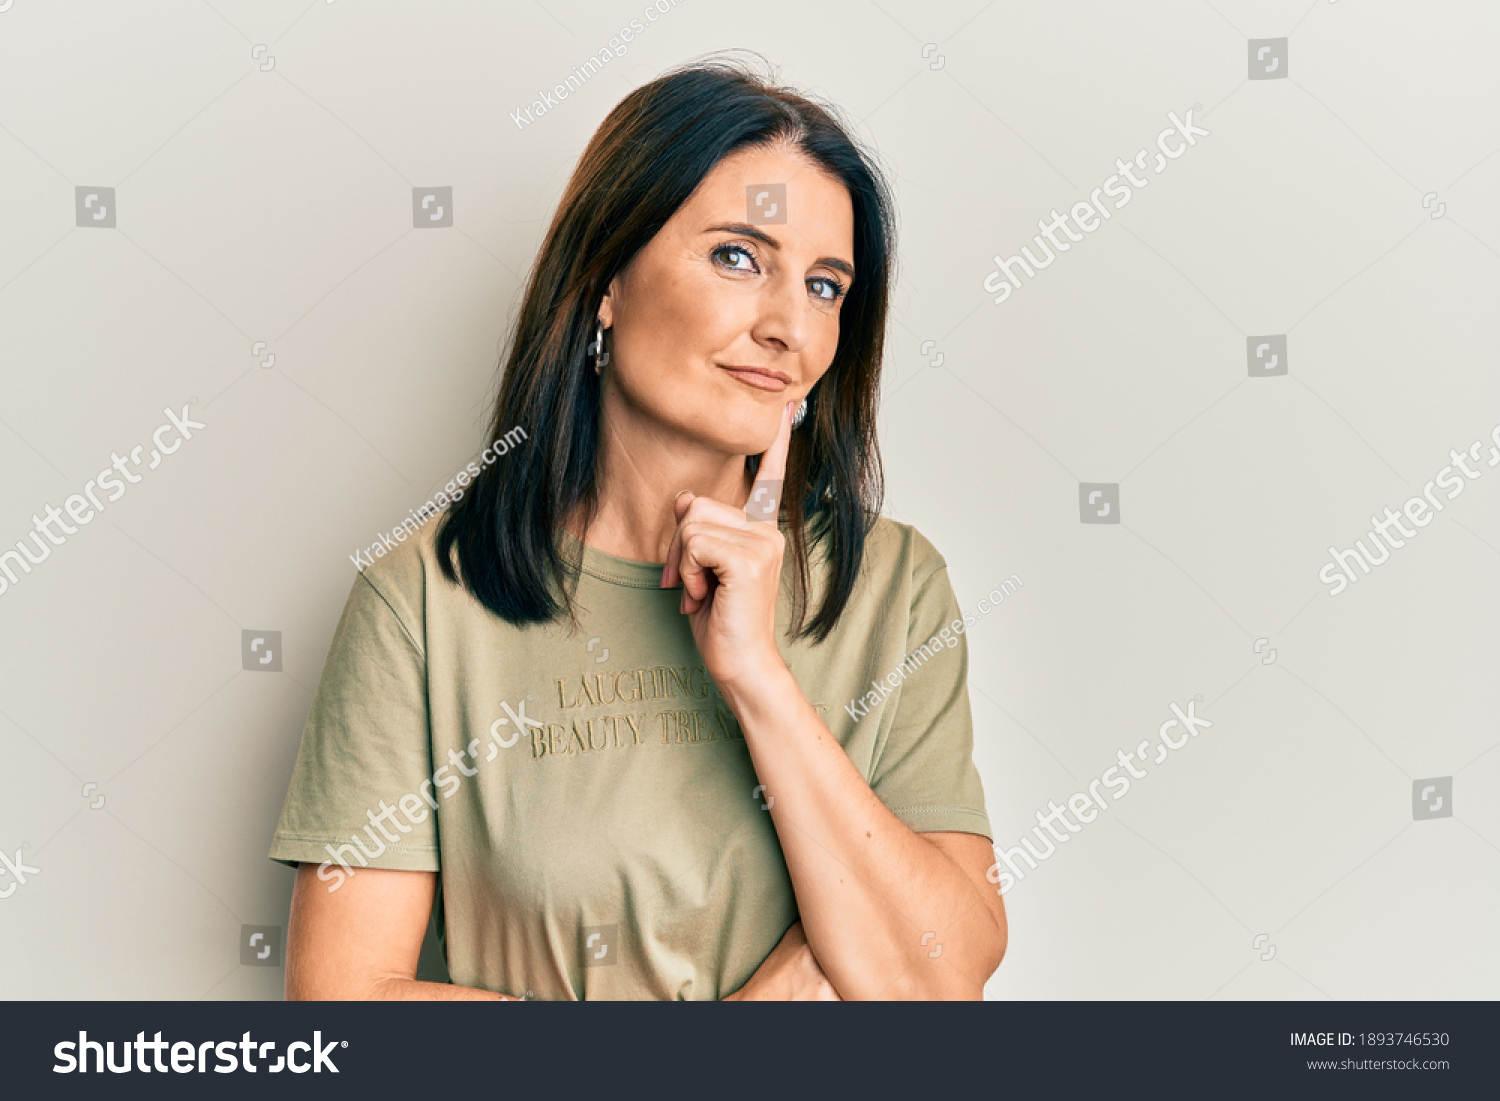 Middle age brunette woman wearing casual clothes smiling looking confident at the camera with crossed arms and hand on chin. thinking positive.  #1893746530